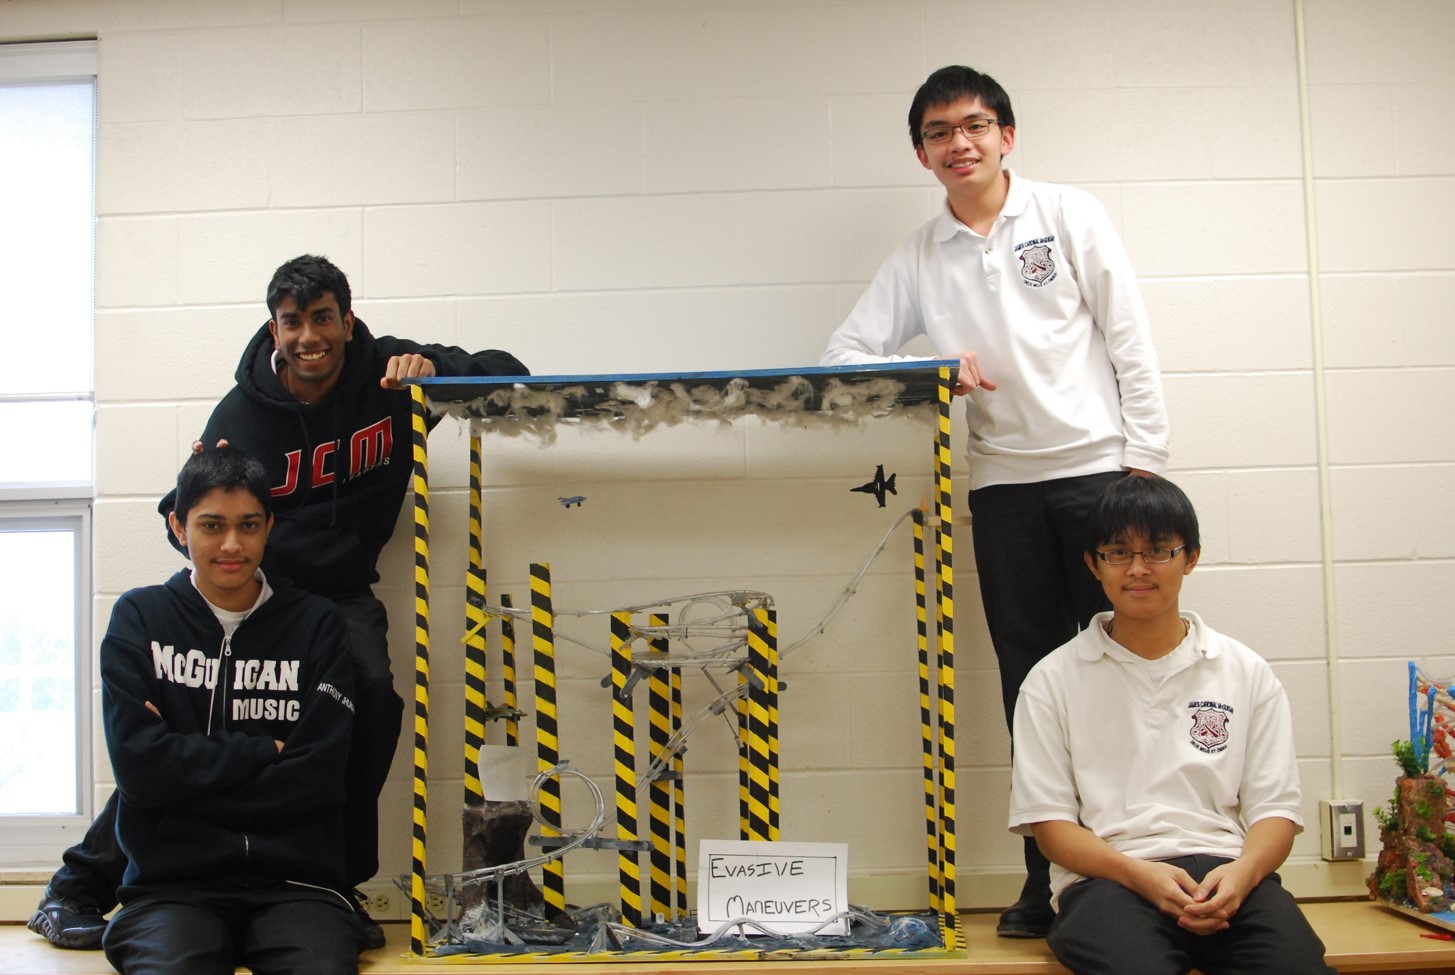 Students posing with science project